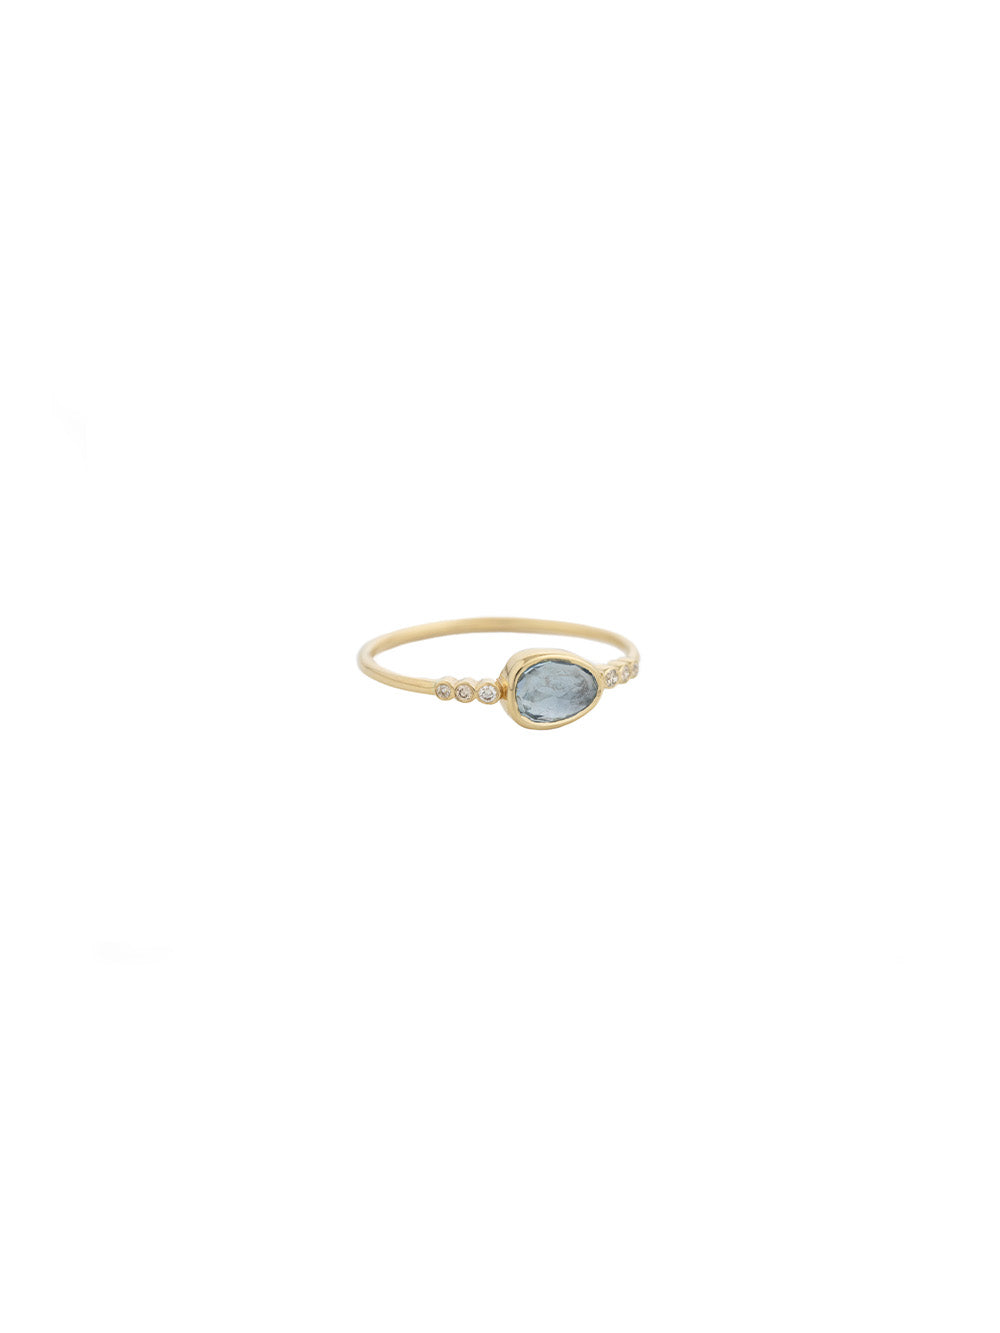 EAGUE-NAVY RING AND 6 DIAMONDS